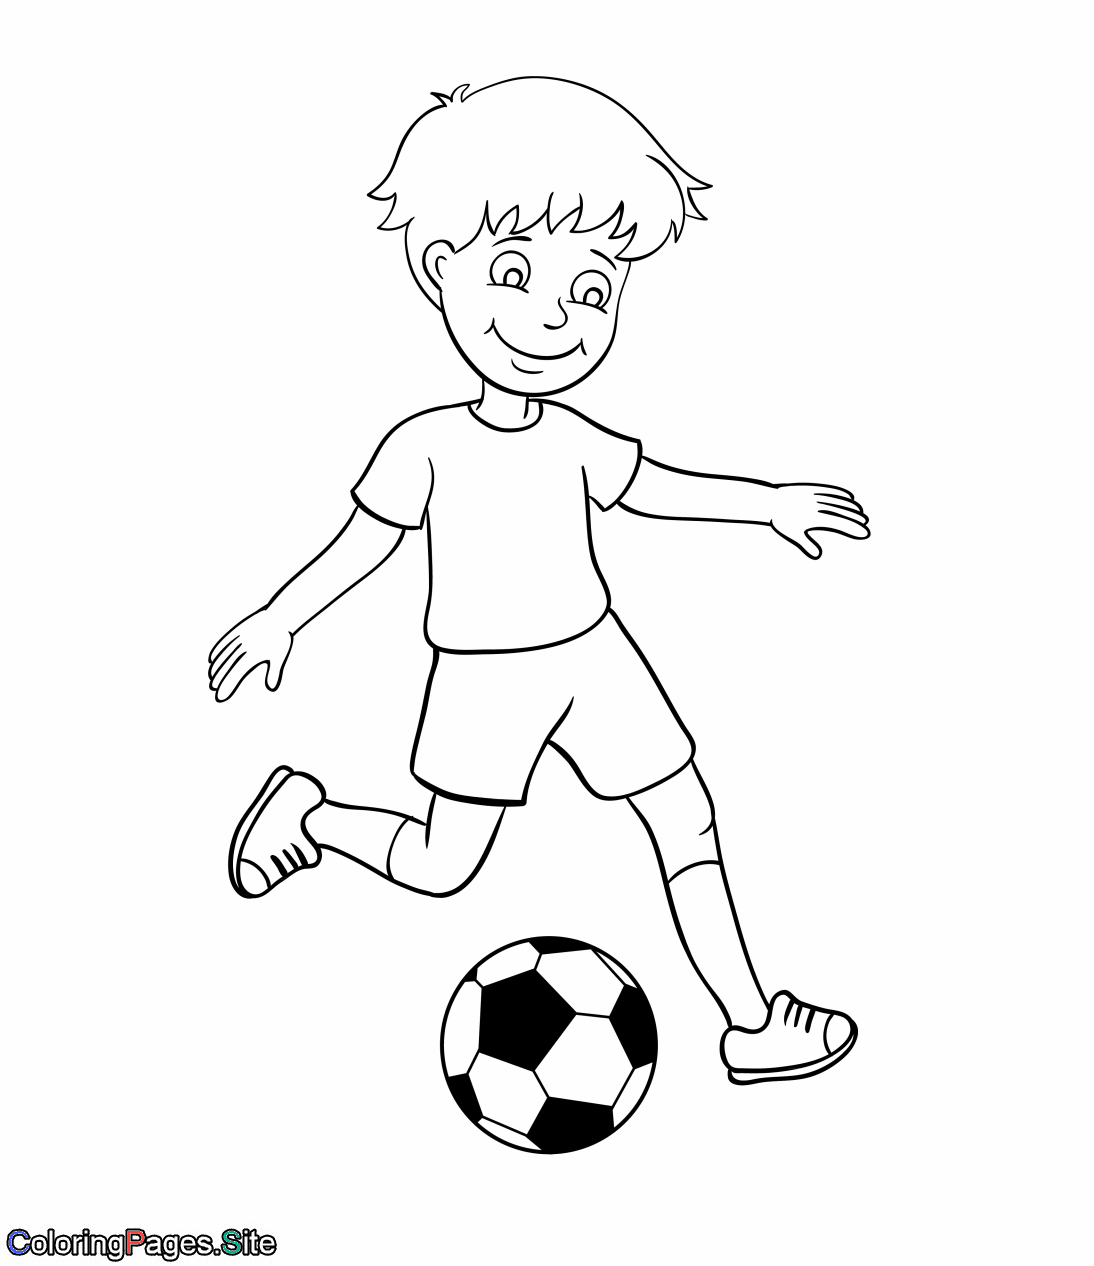 Boy is kicking a soccer ball coloring page